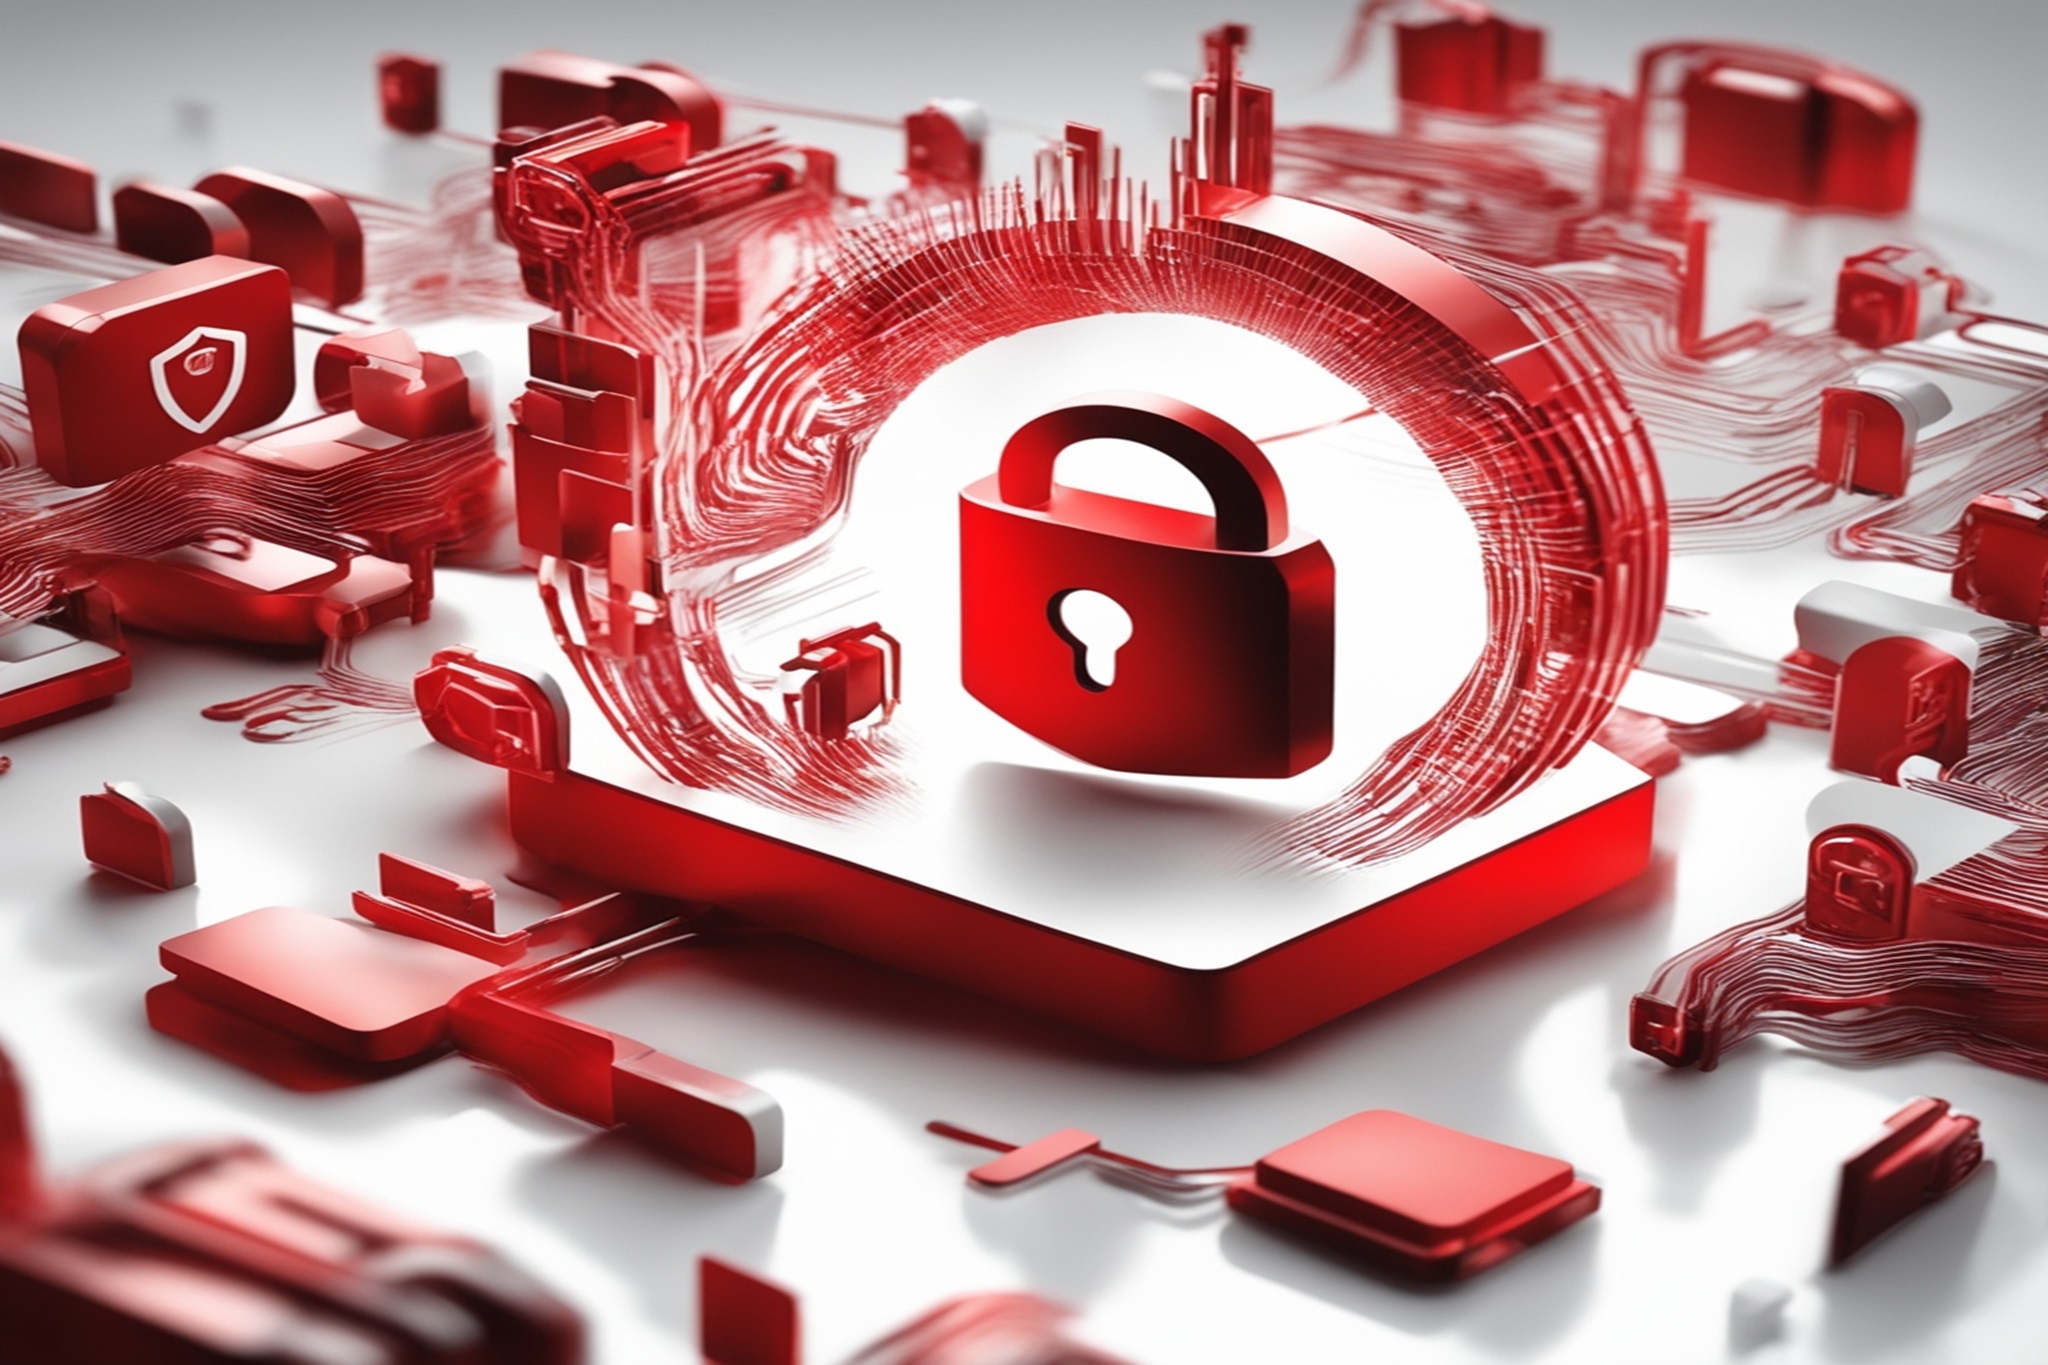 Secure red padlock among electronic gadgets, representing digital protection.